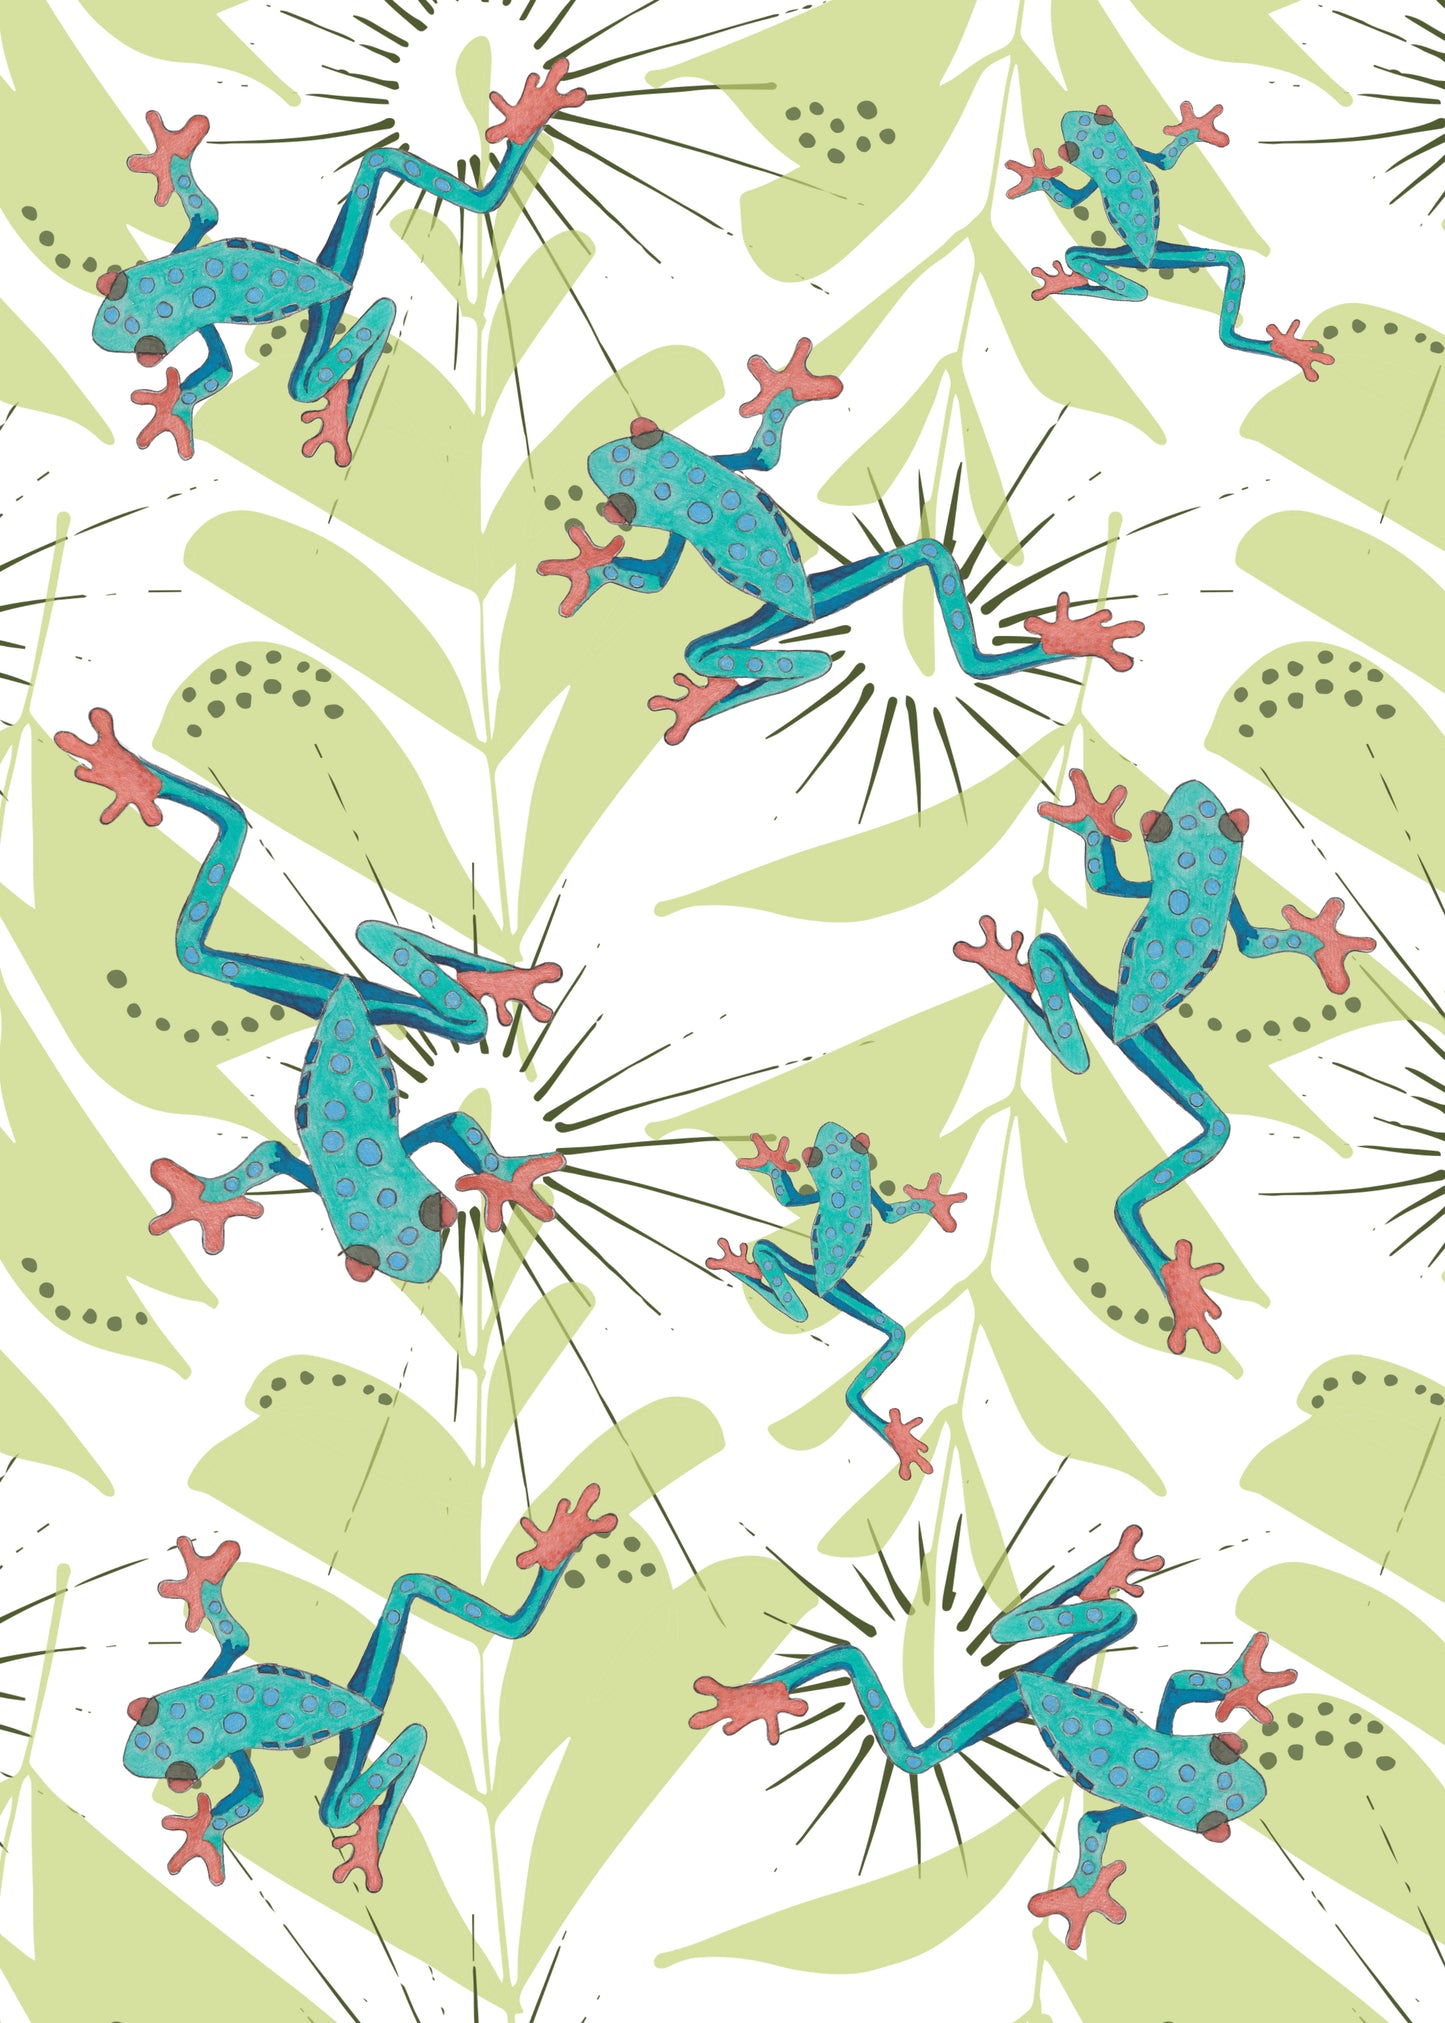 Frogs & Ferns - Large tote Bag (double design)